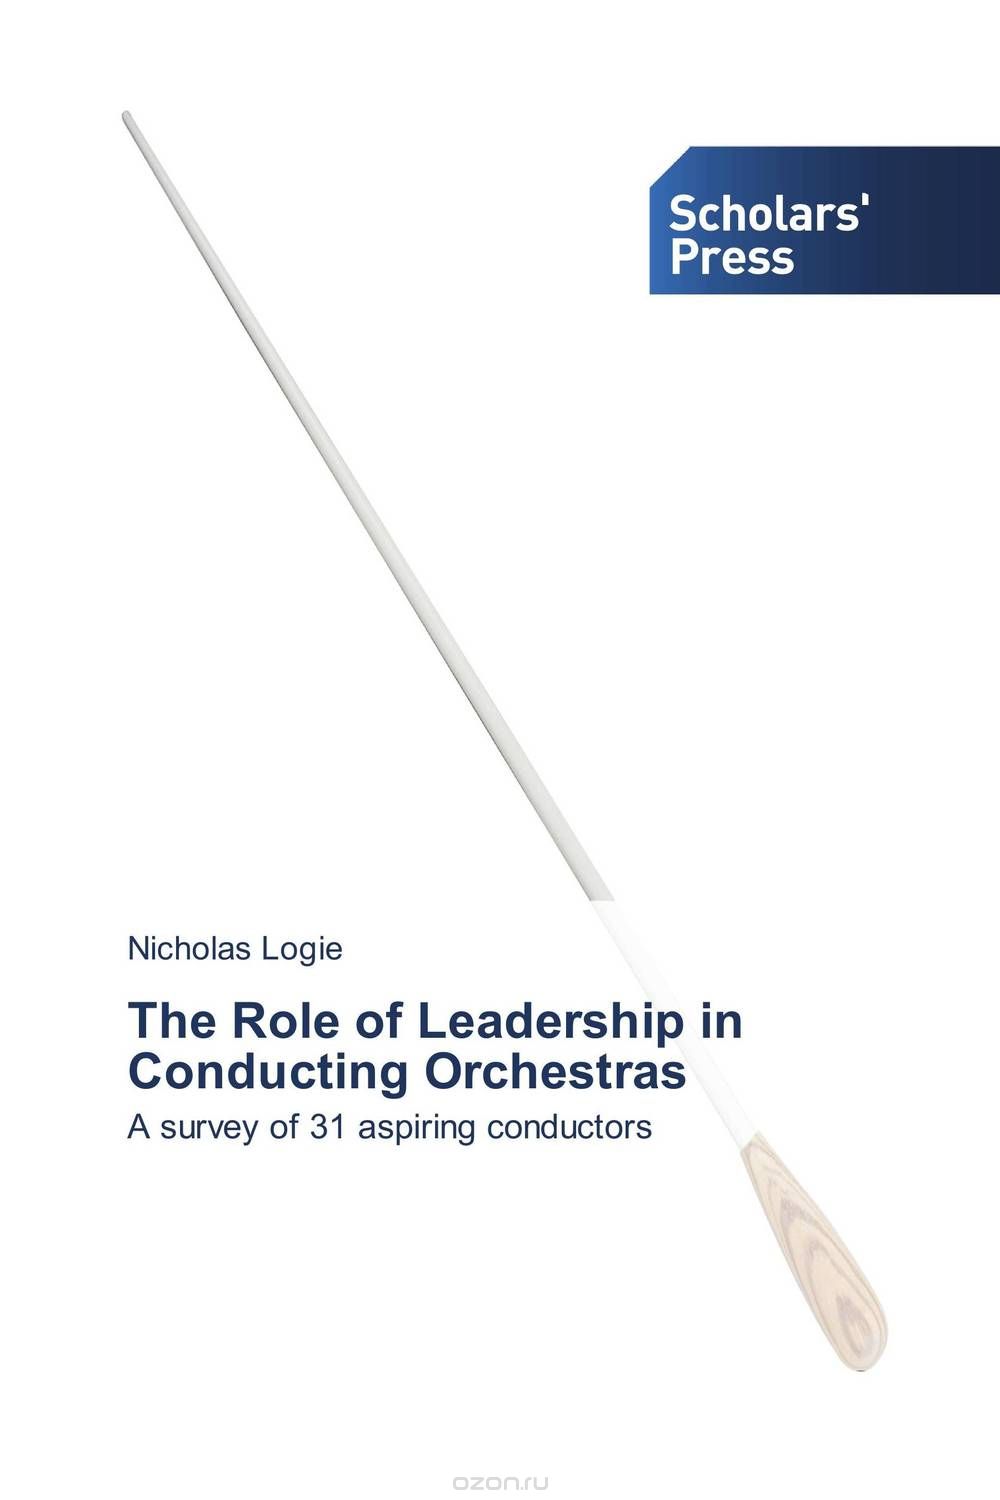 The Role of Leadership in Conducting Orchestras